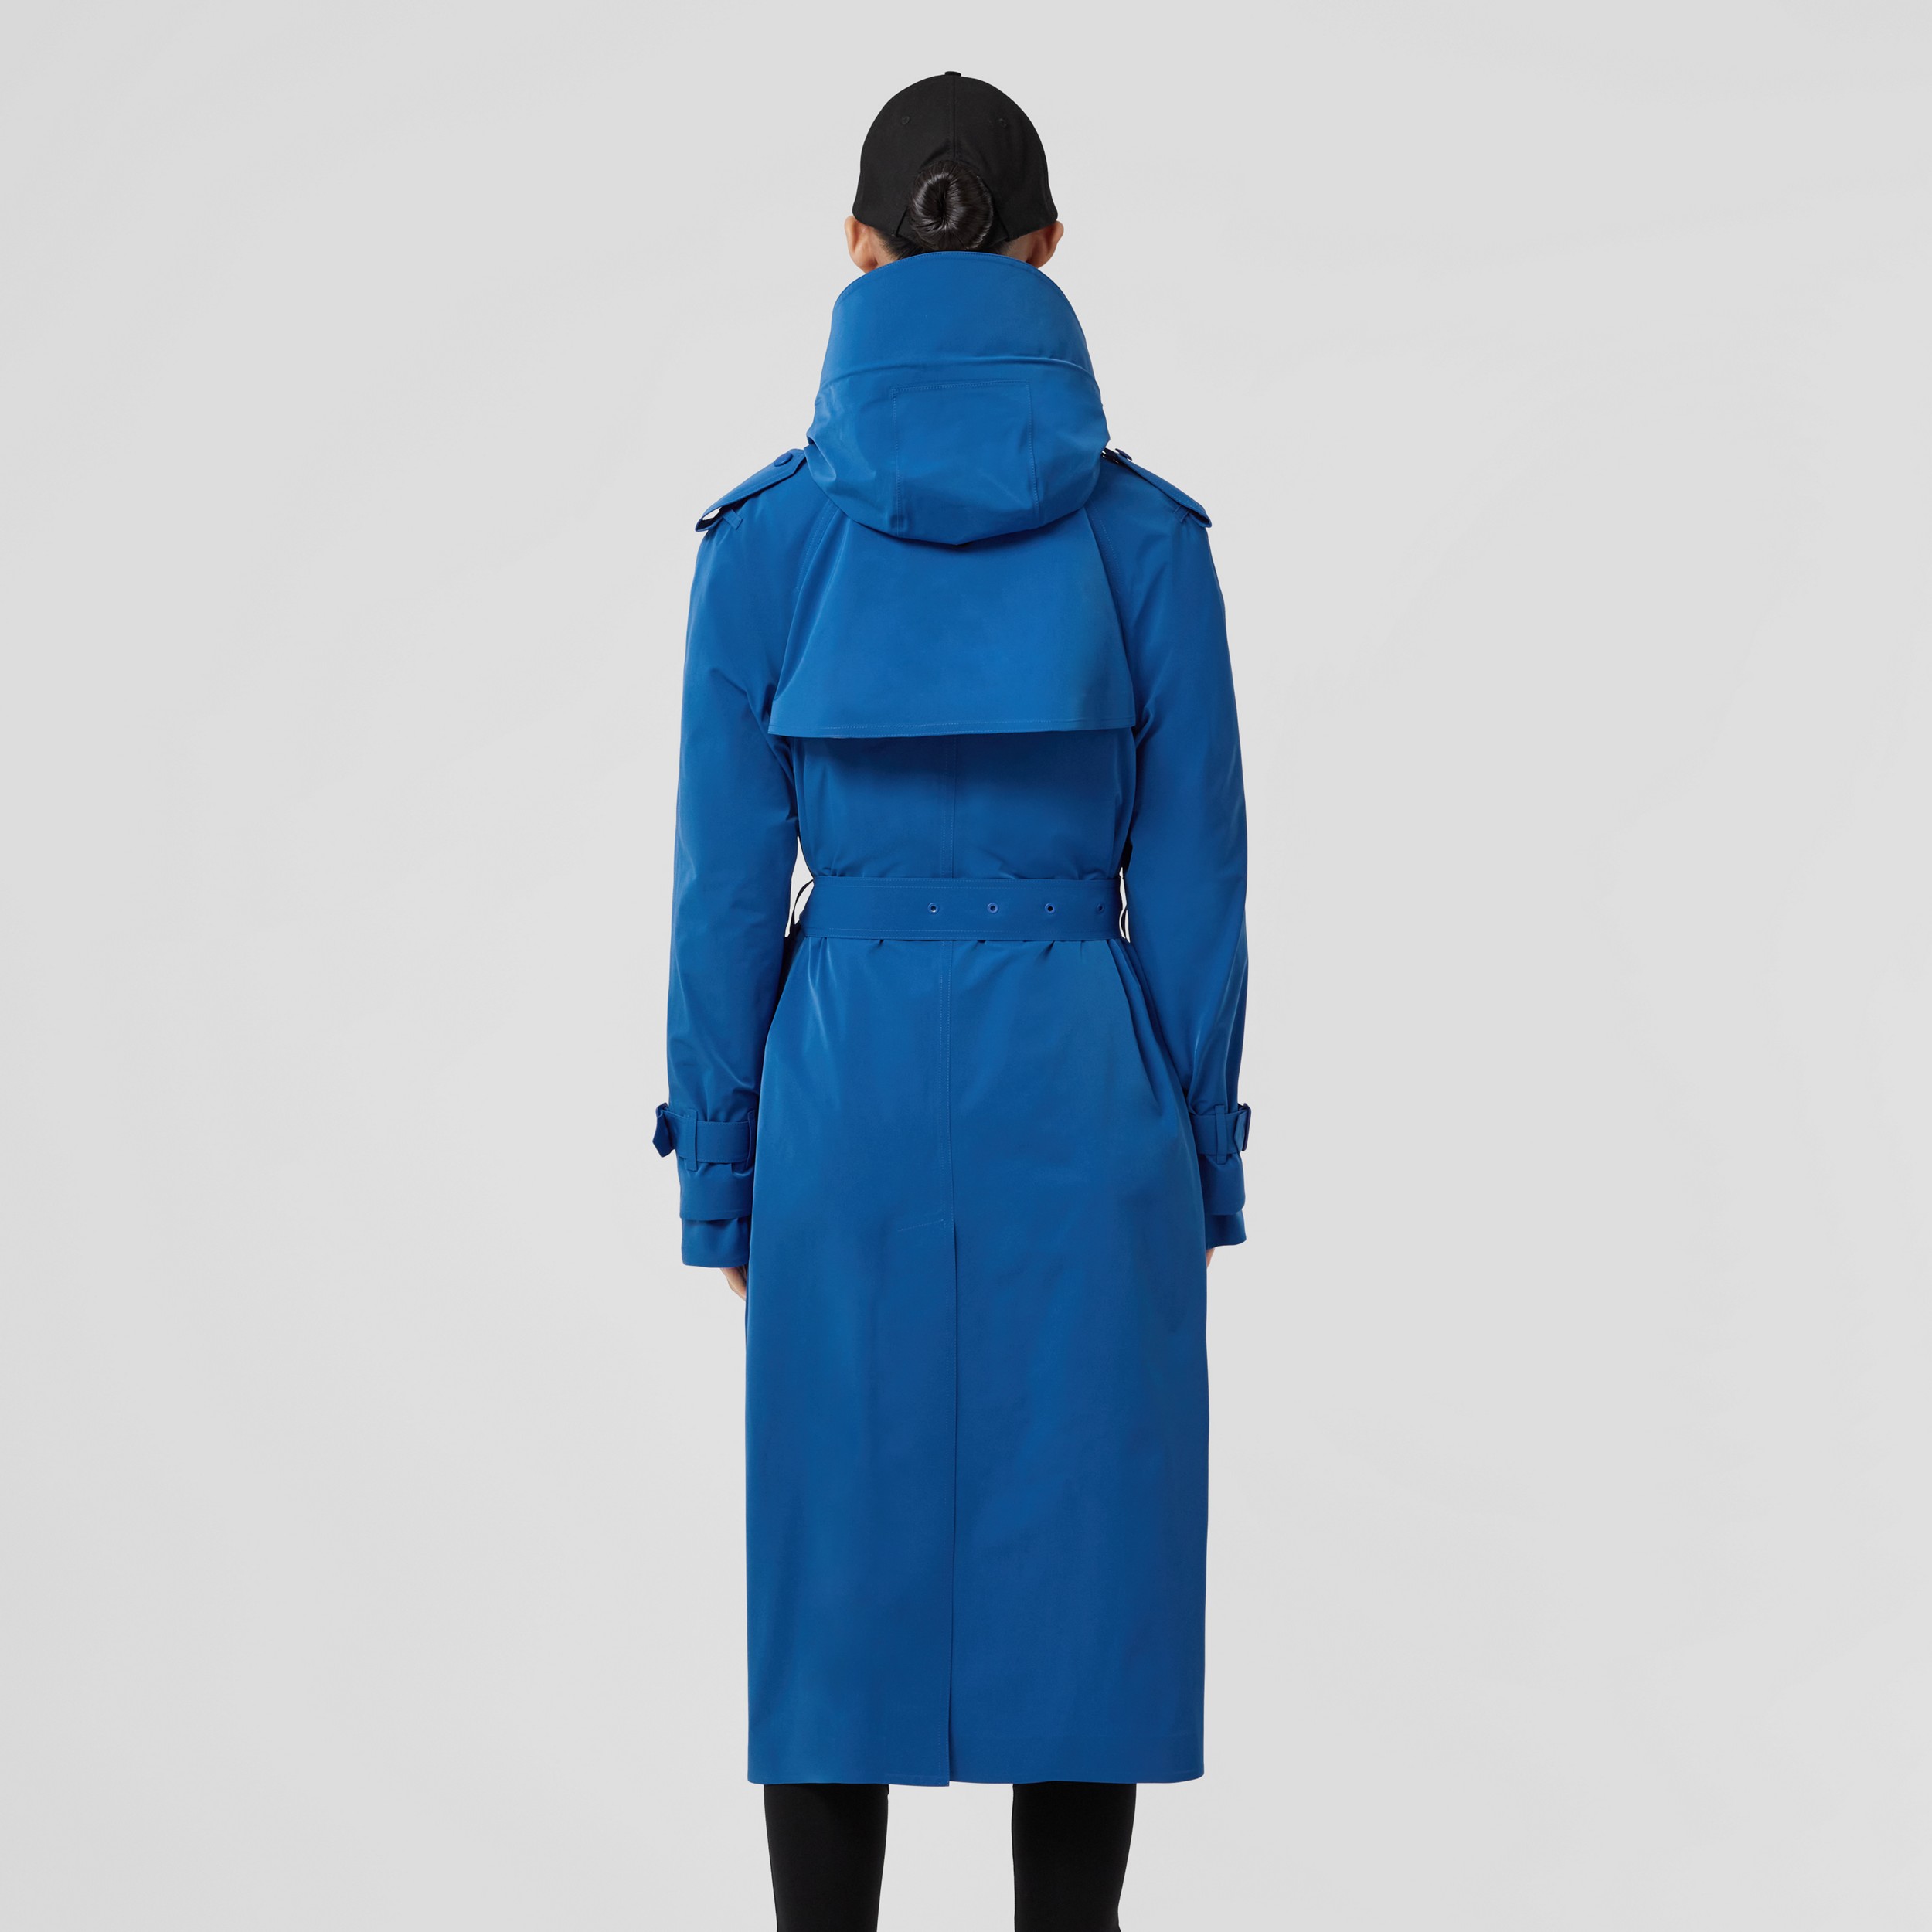 out of service Thaw, thaw, frost thaw Subtropical Lightweight Waterloo Trench Coat in Deep Marine Blue - Women | Burberry®  Official